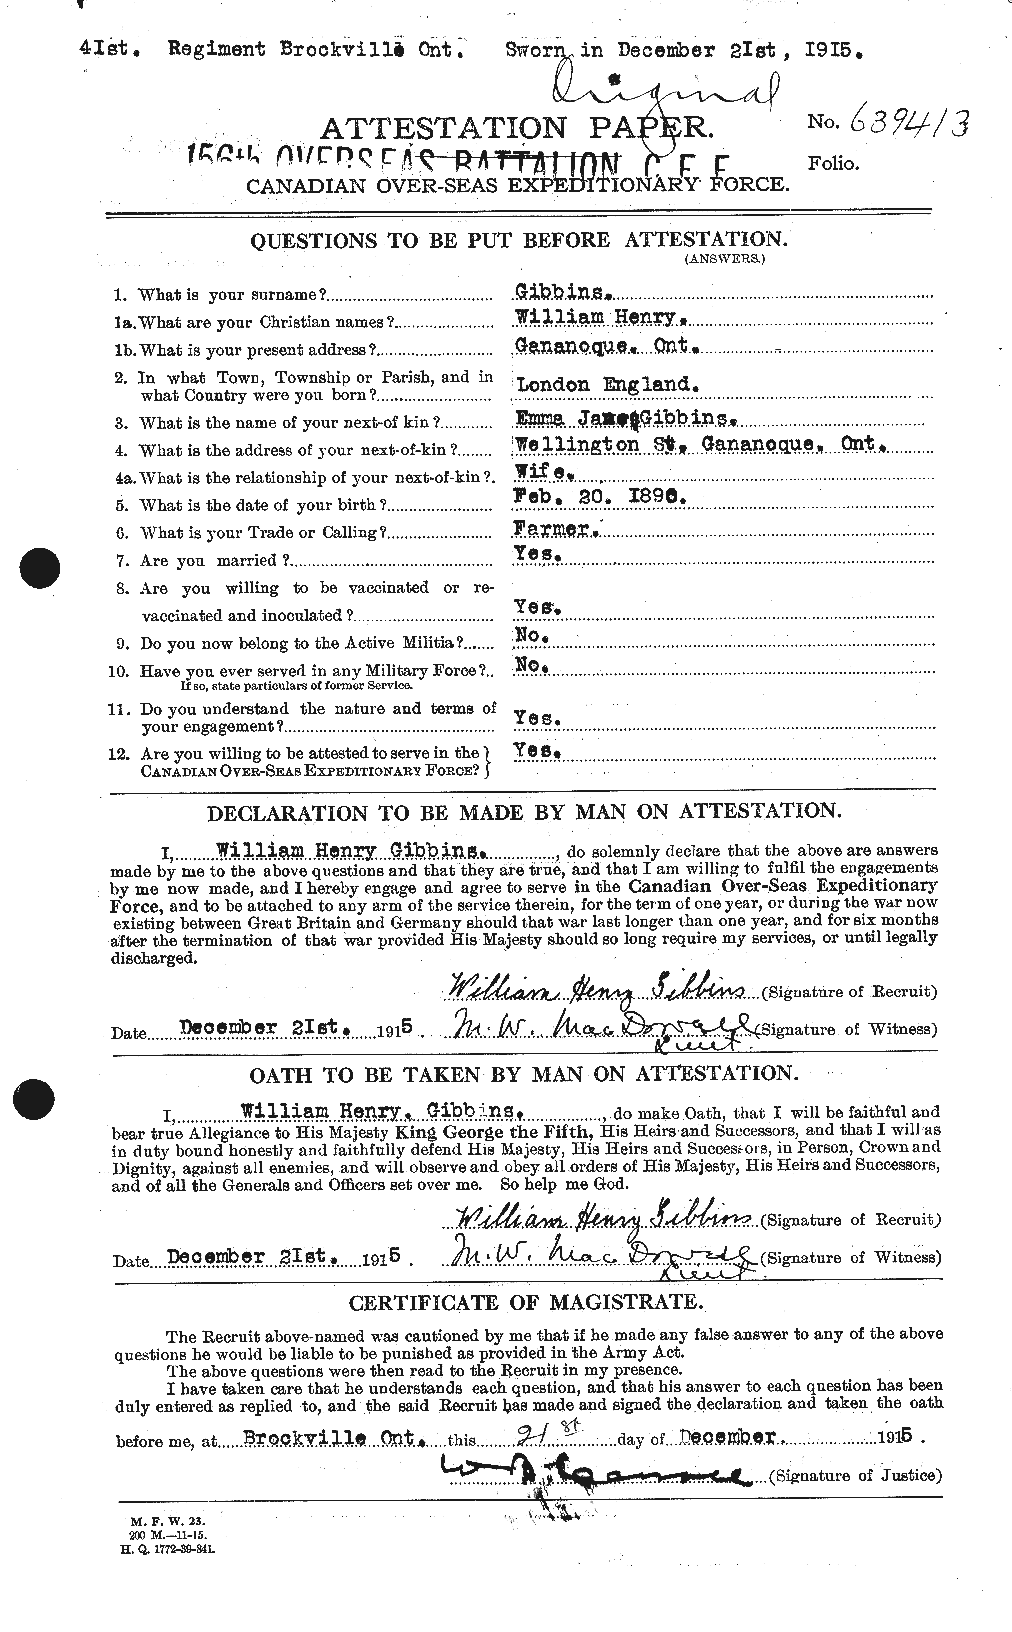 Personnel Records of the First World War - CEF 347935a